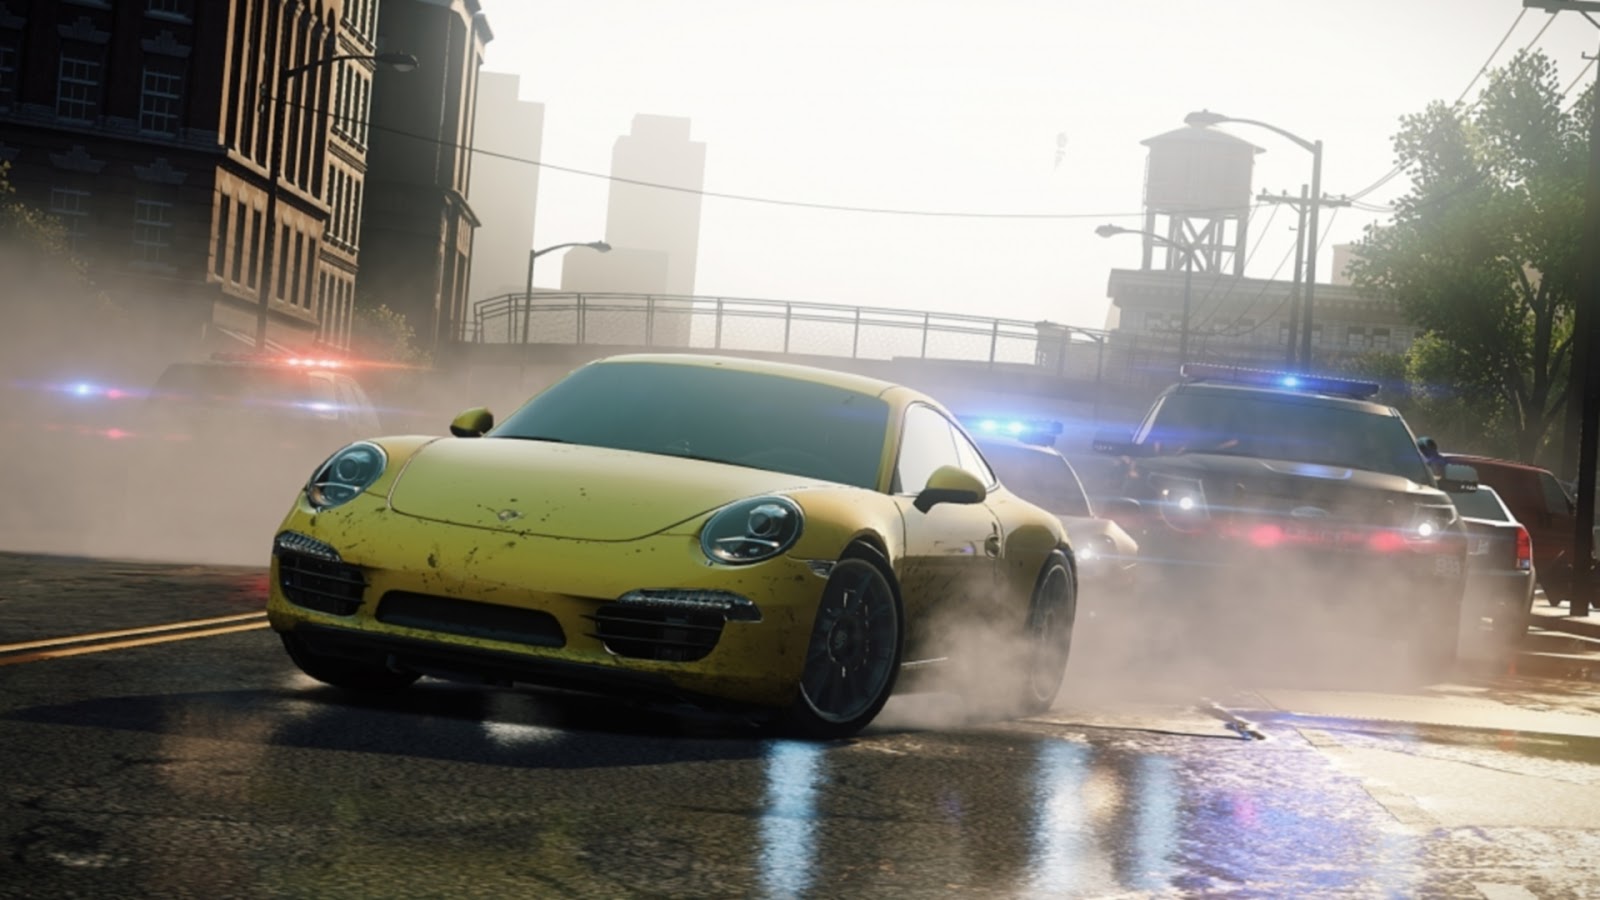 HD Wallpaper Mania Need For Speed Most Wanted